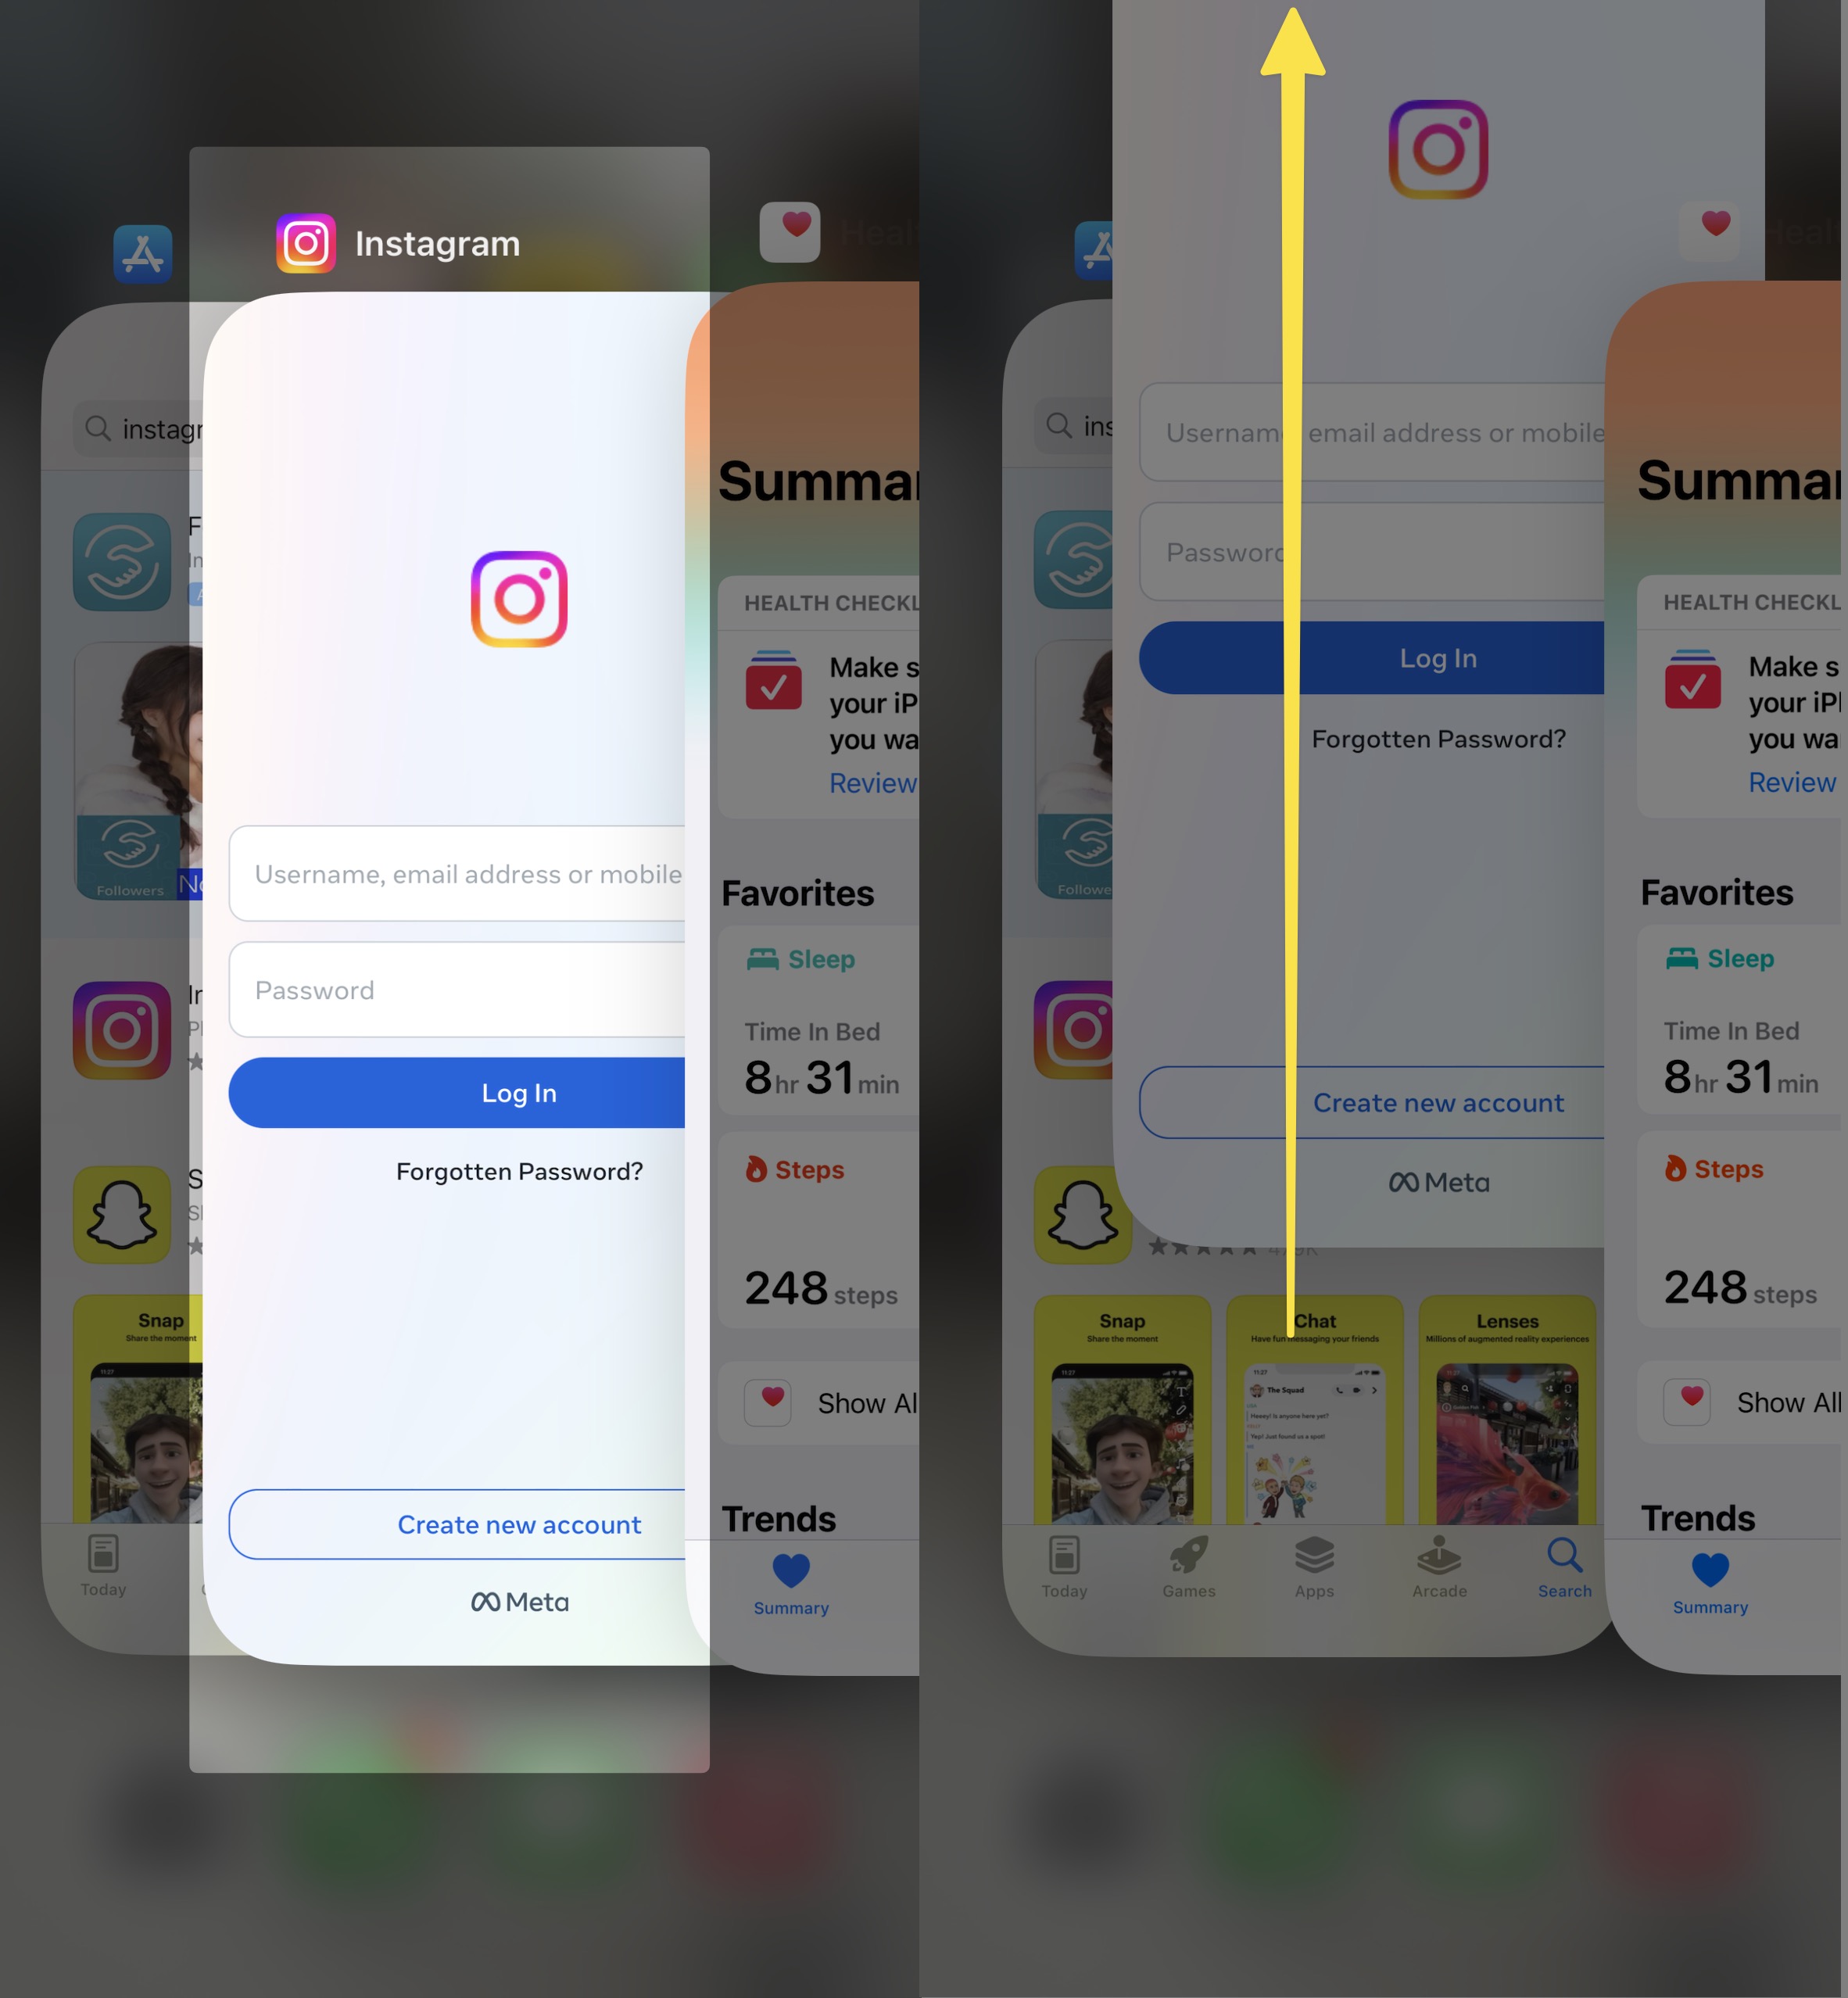 force close instagram app on iPhone